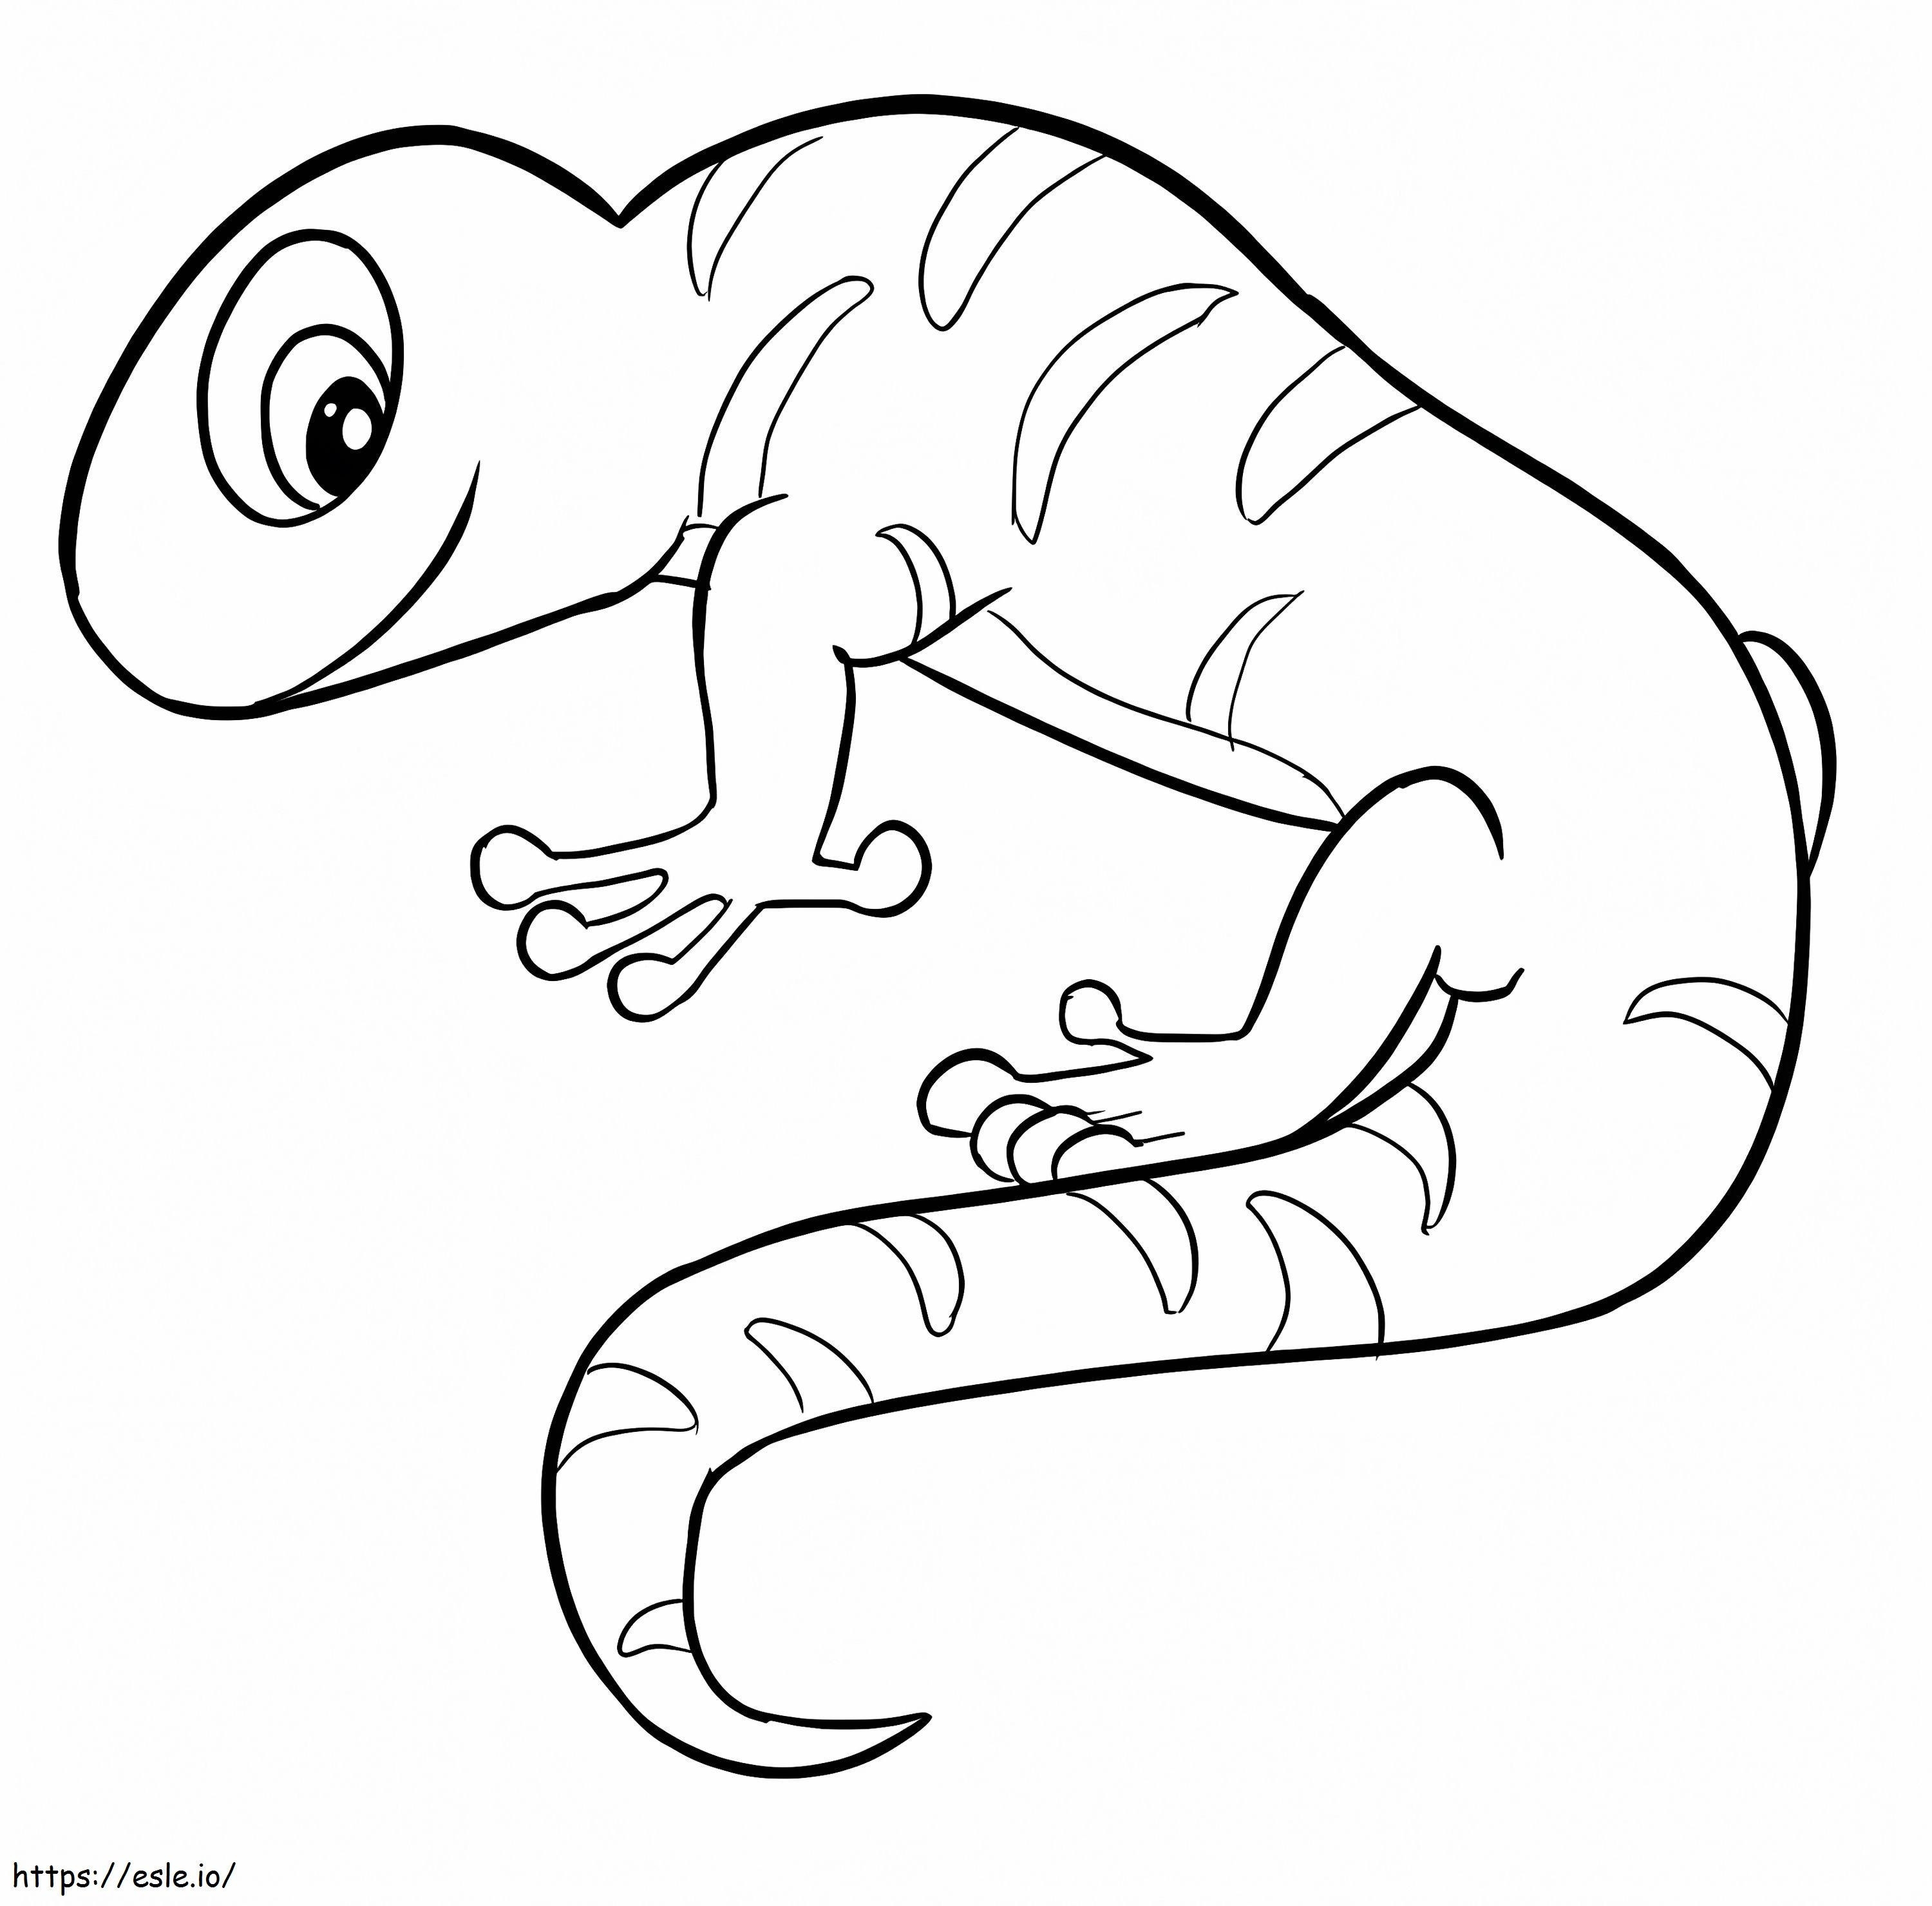 Cartoon Newt coloring page